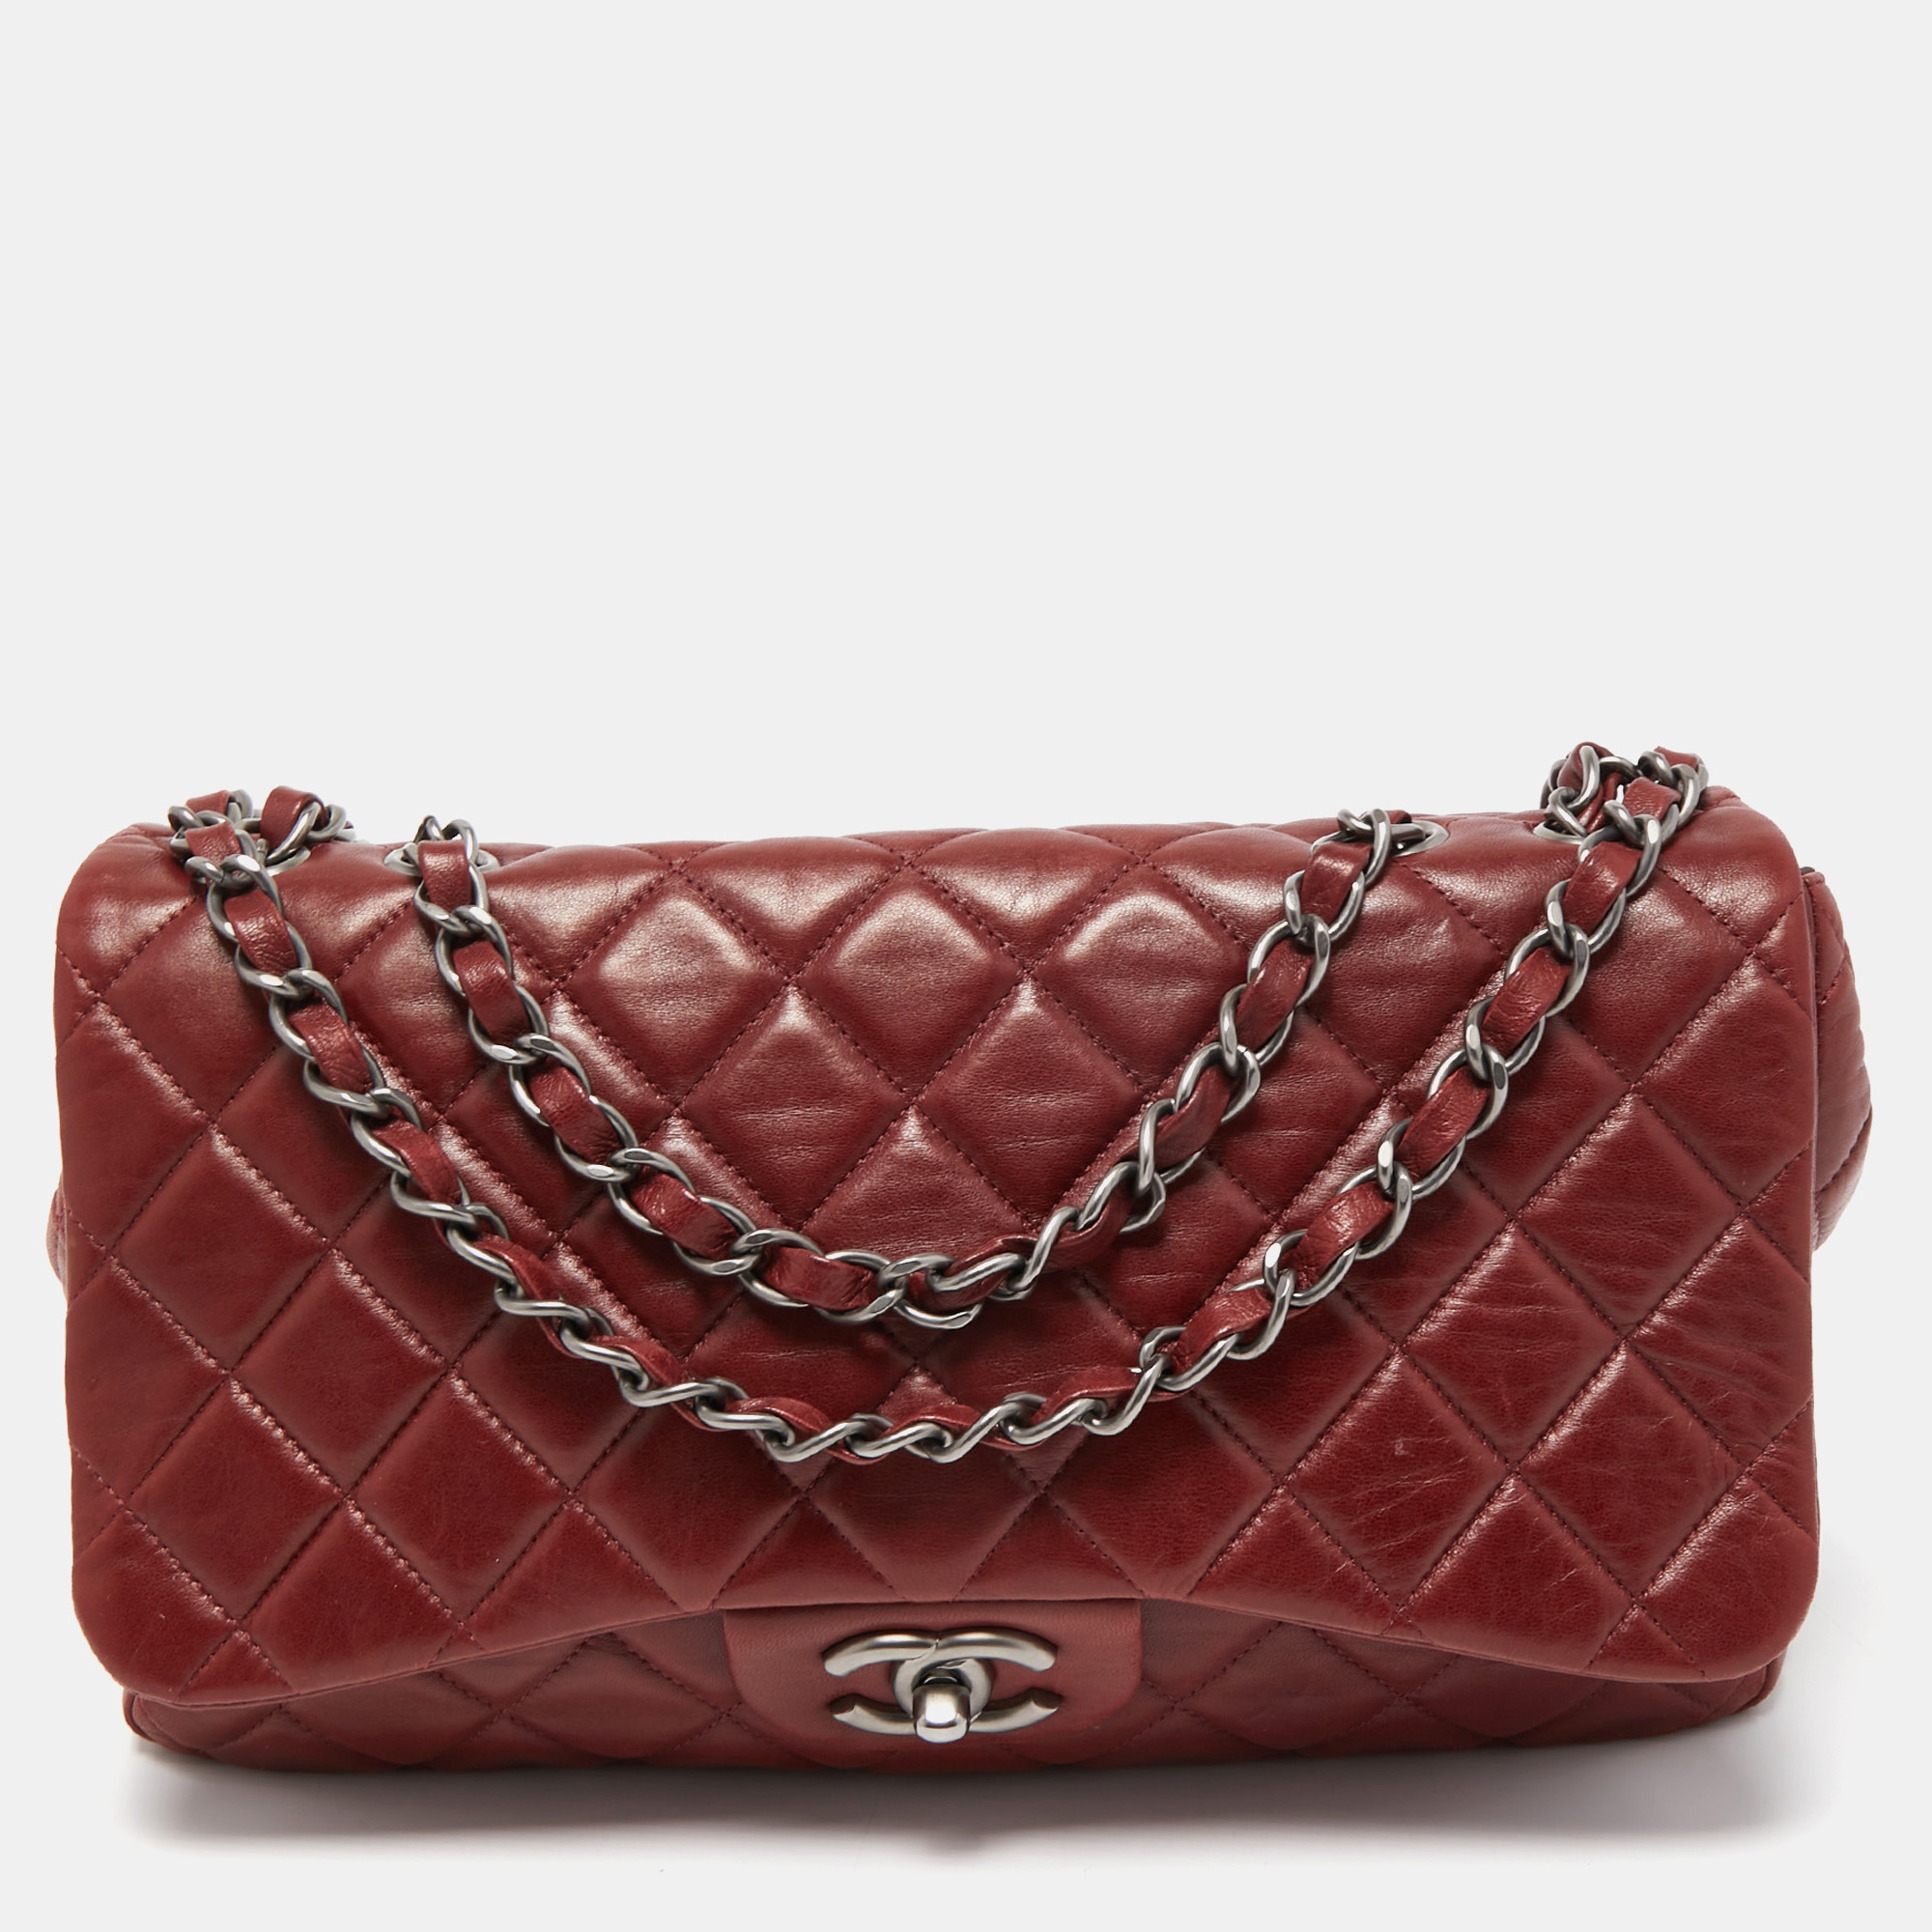 Chanel red quilted leather jumbo classic single flap bag